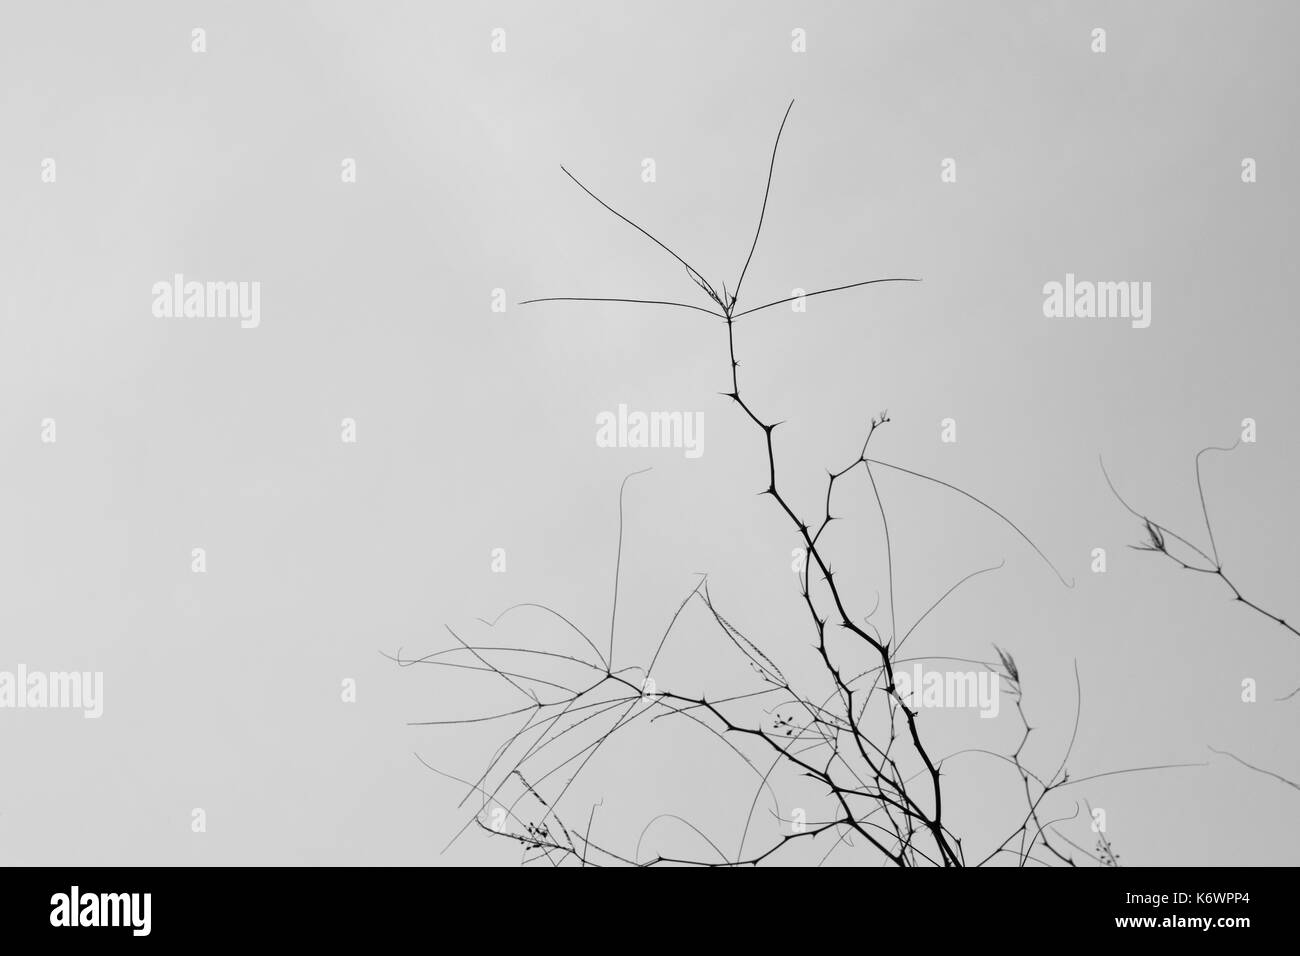 Branches with thorns and twigs against a gray winter sky. Stock Photo